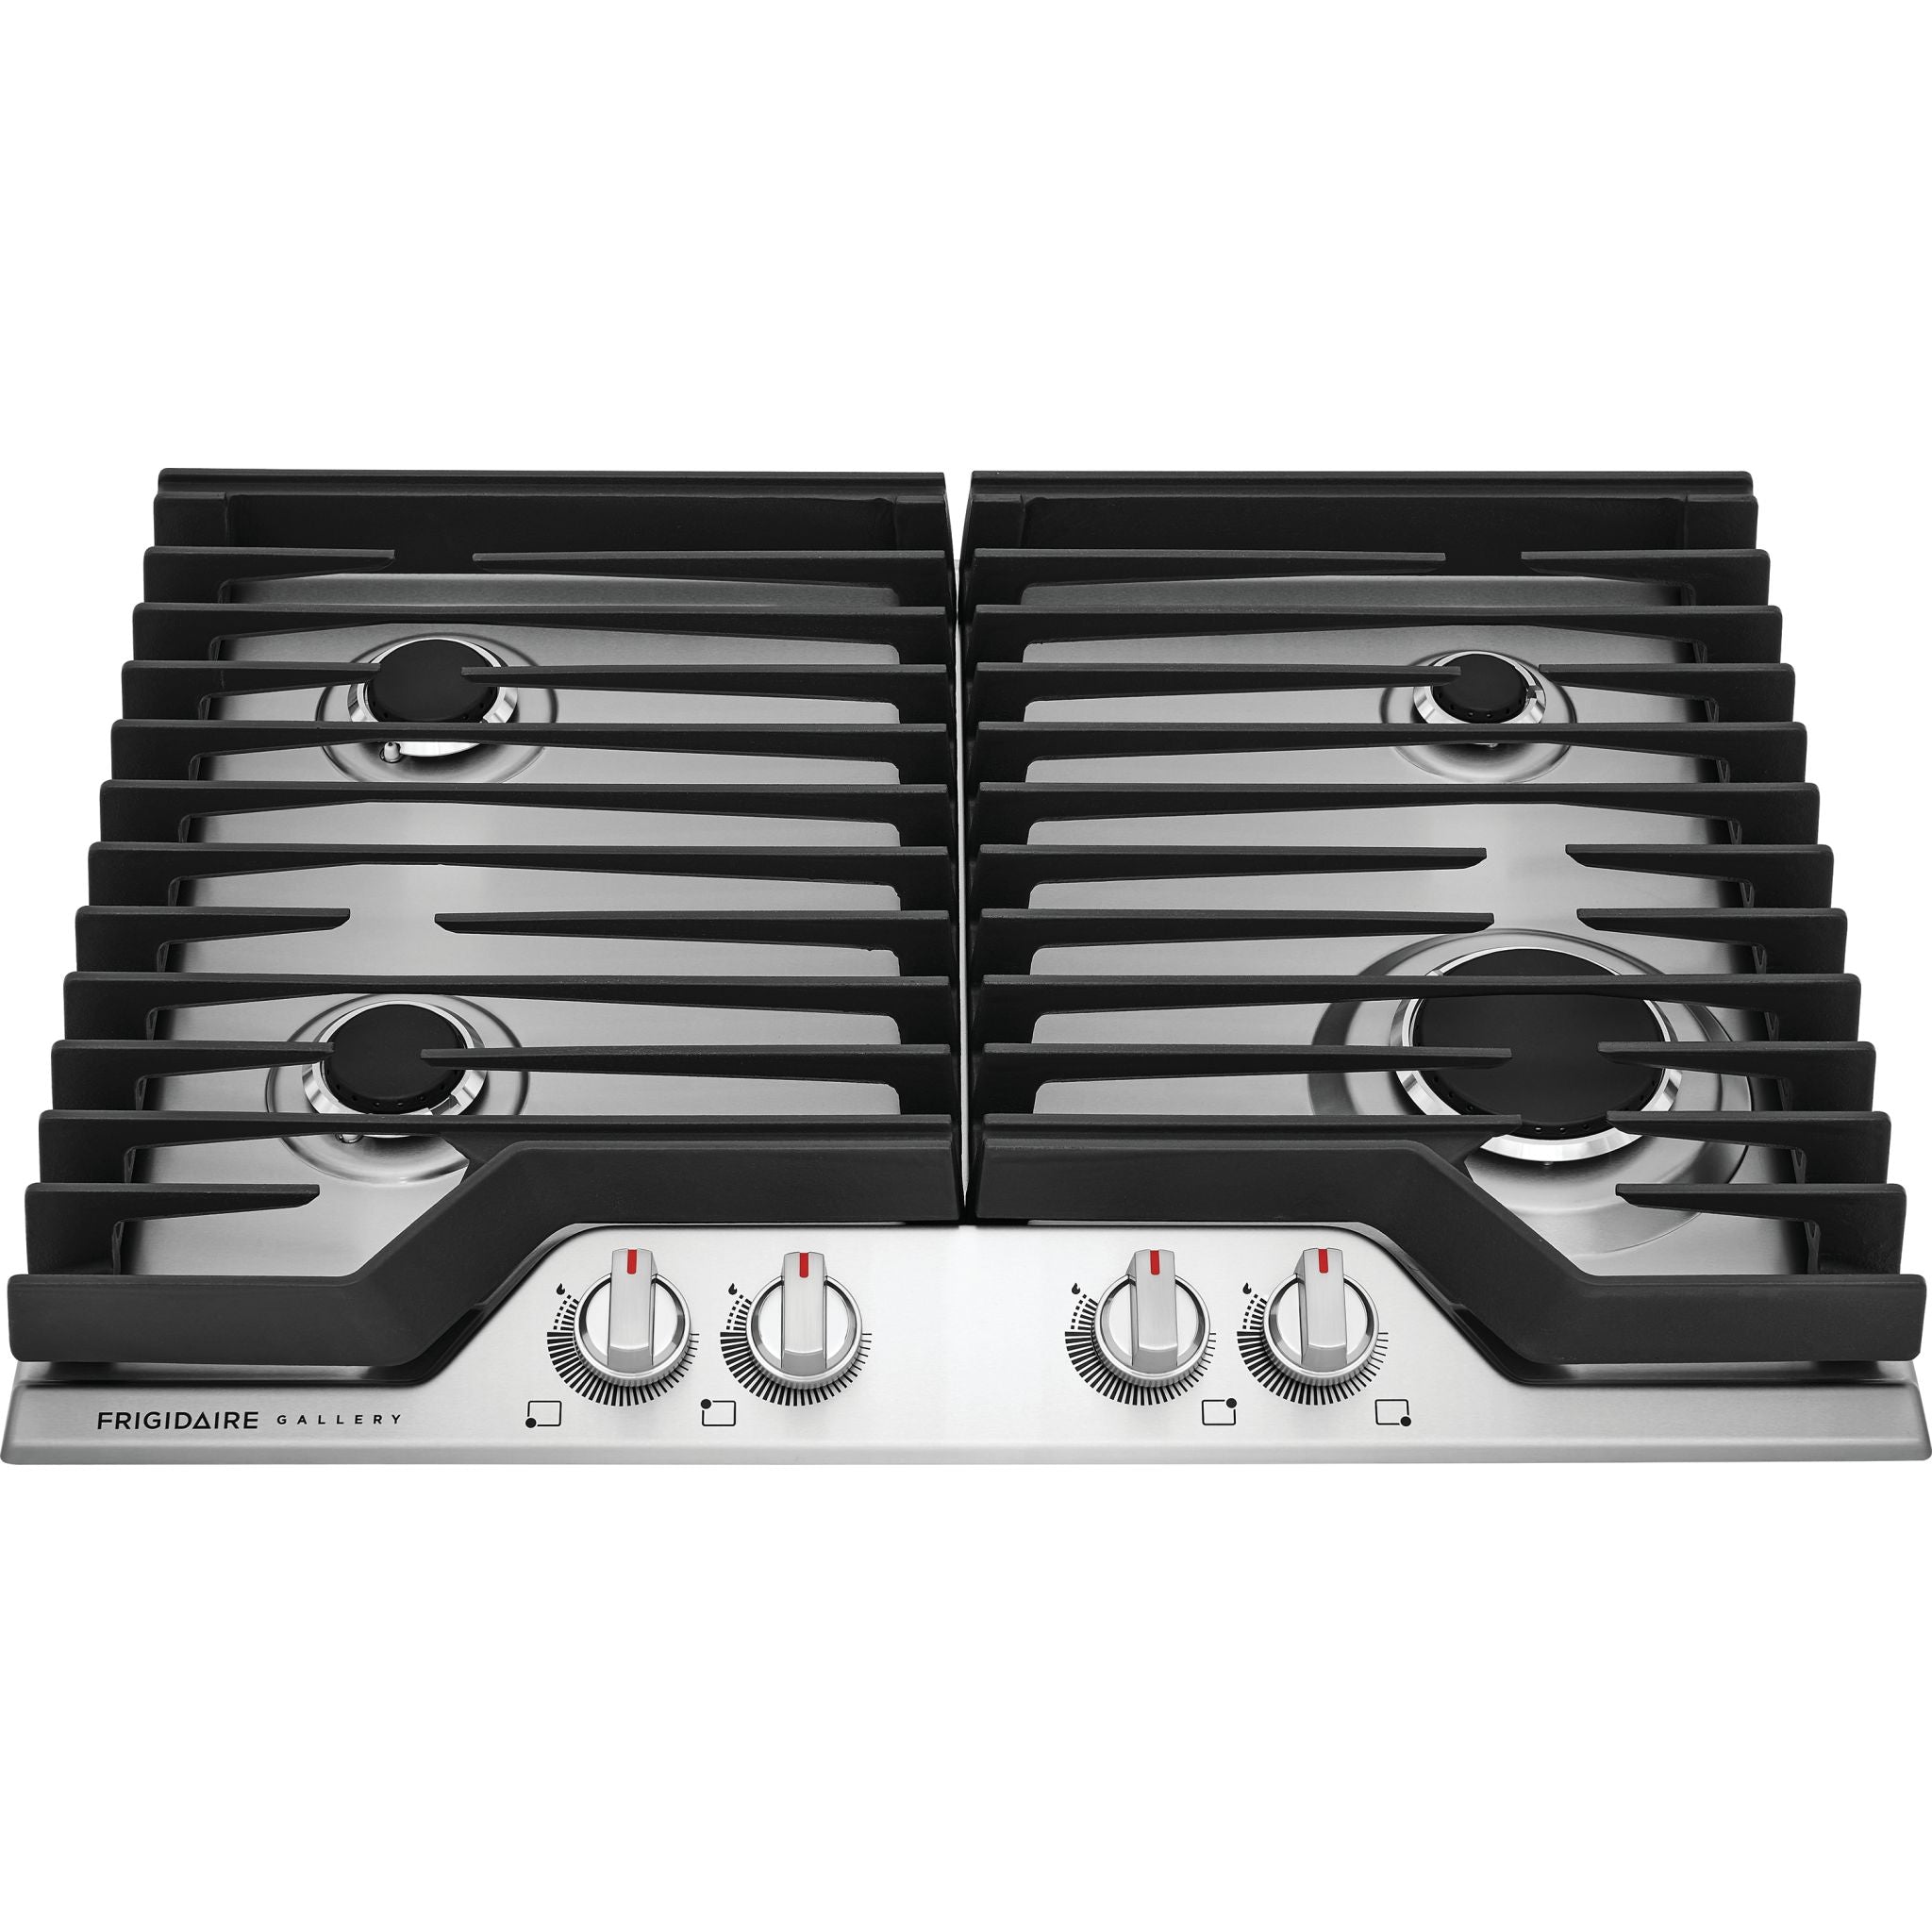 Frigidaire Gallery, Frigidaire Gallery 30" Gas Cooktop (GCCG3046AS) - Stainless Steel